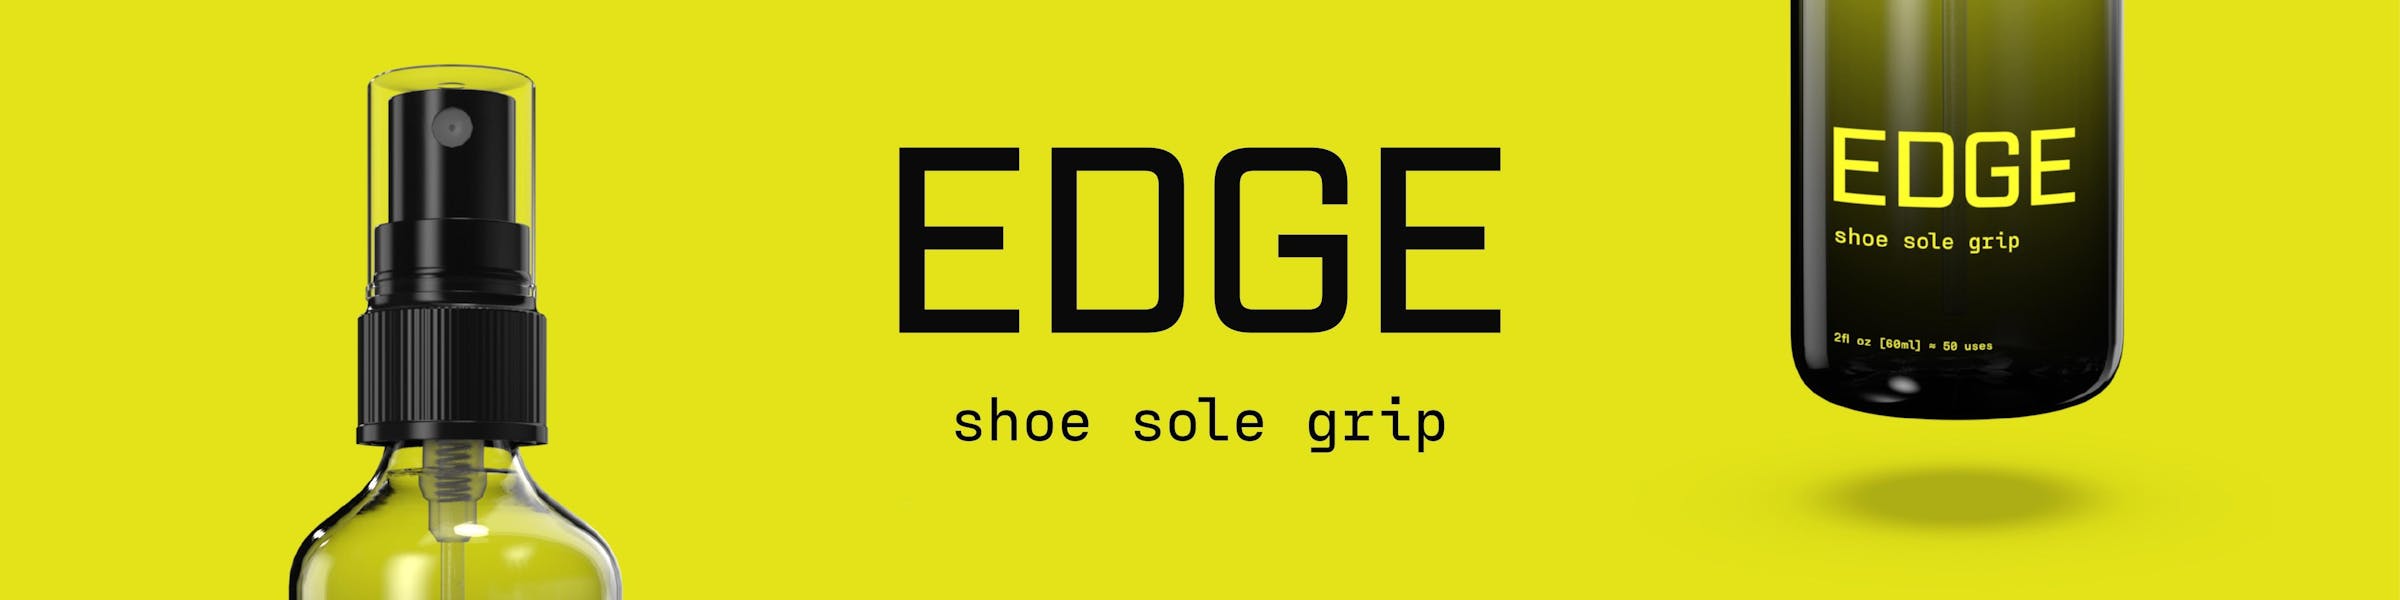 NEW EDGE TRACTION SPRAY FOR BASKETBALL SHOES - Increases